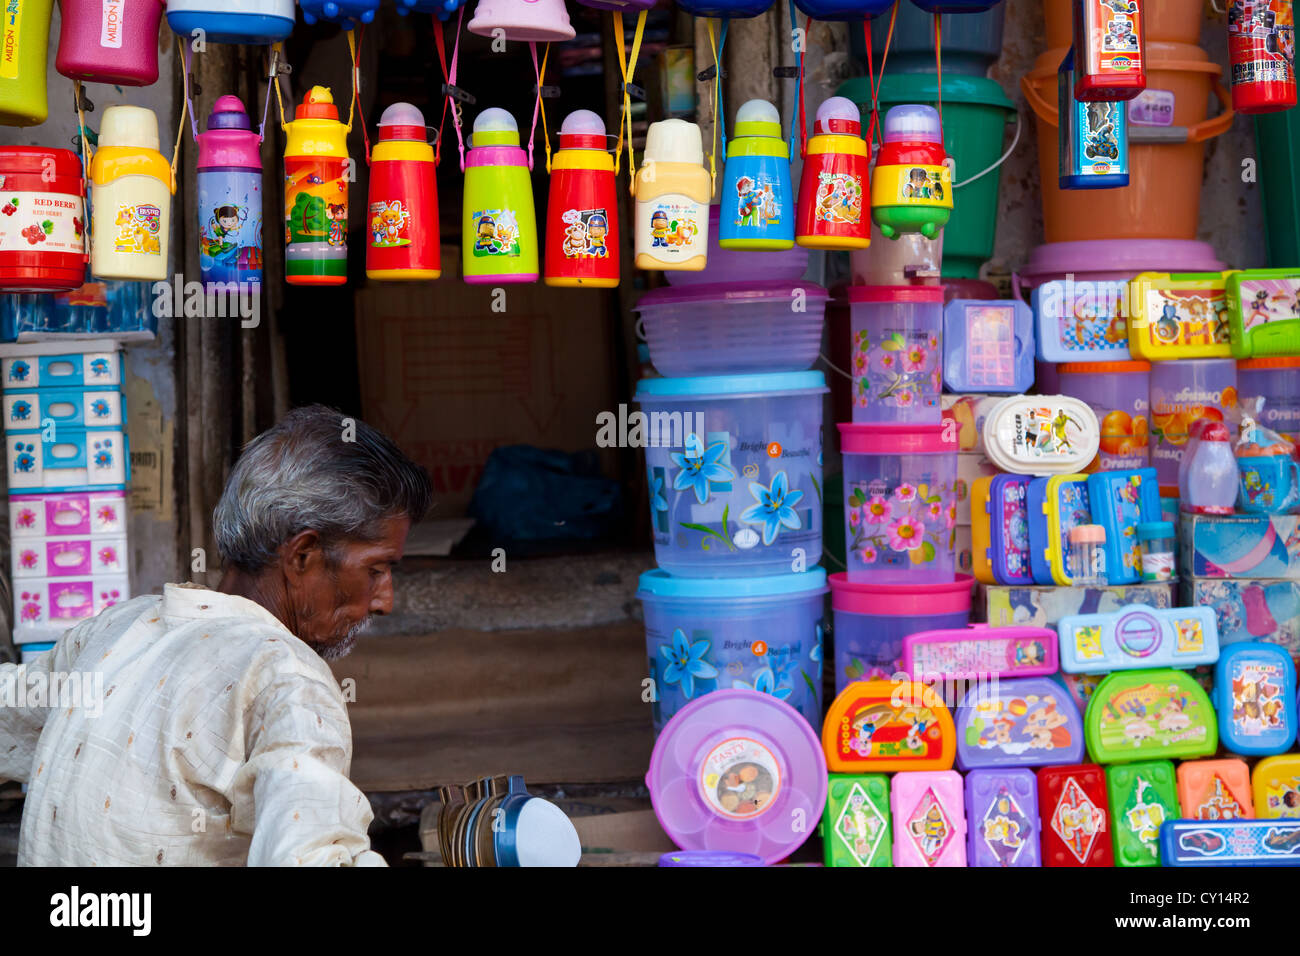 https://c8.alamy.com/comp/CY14R2/shop-for-plastic-products-in-varanasi-india-CY14R2.jpg